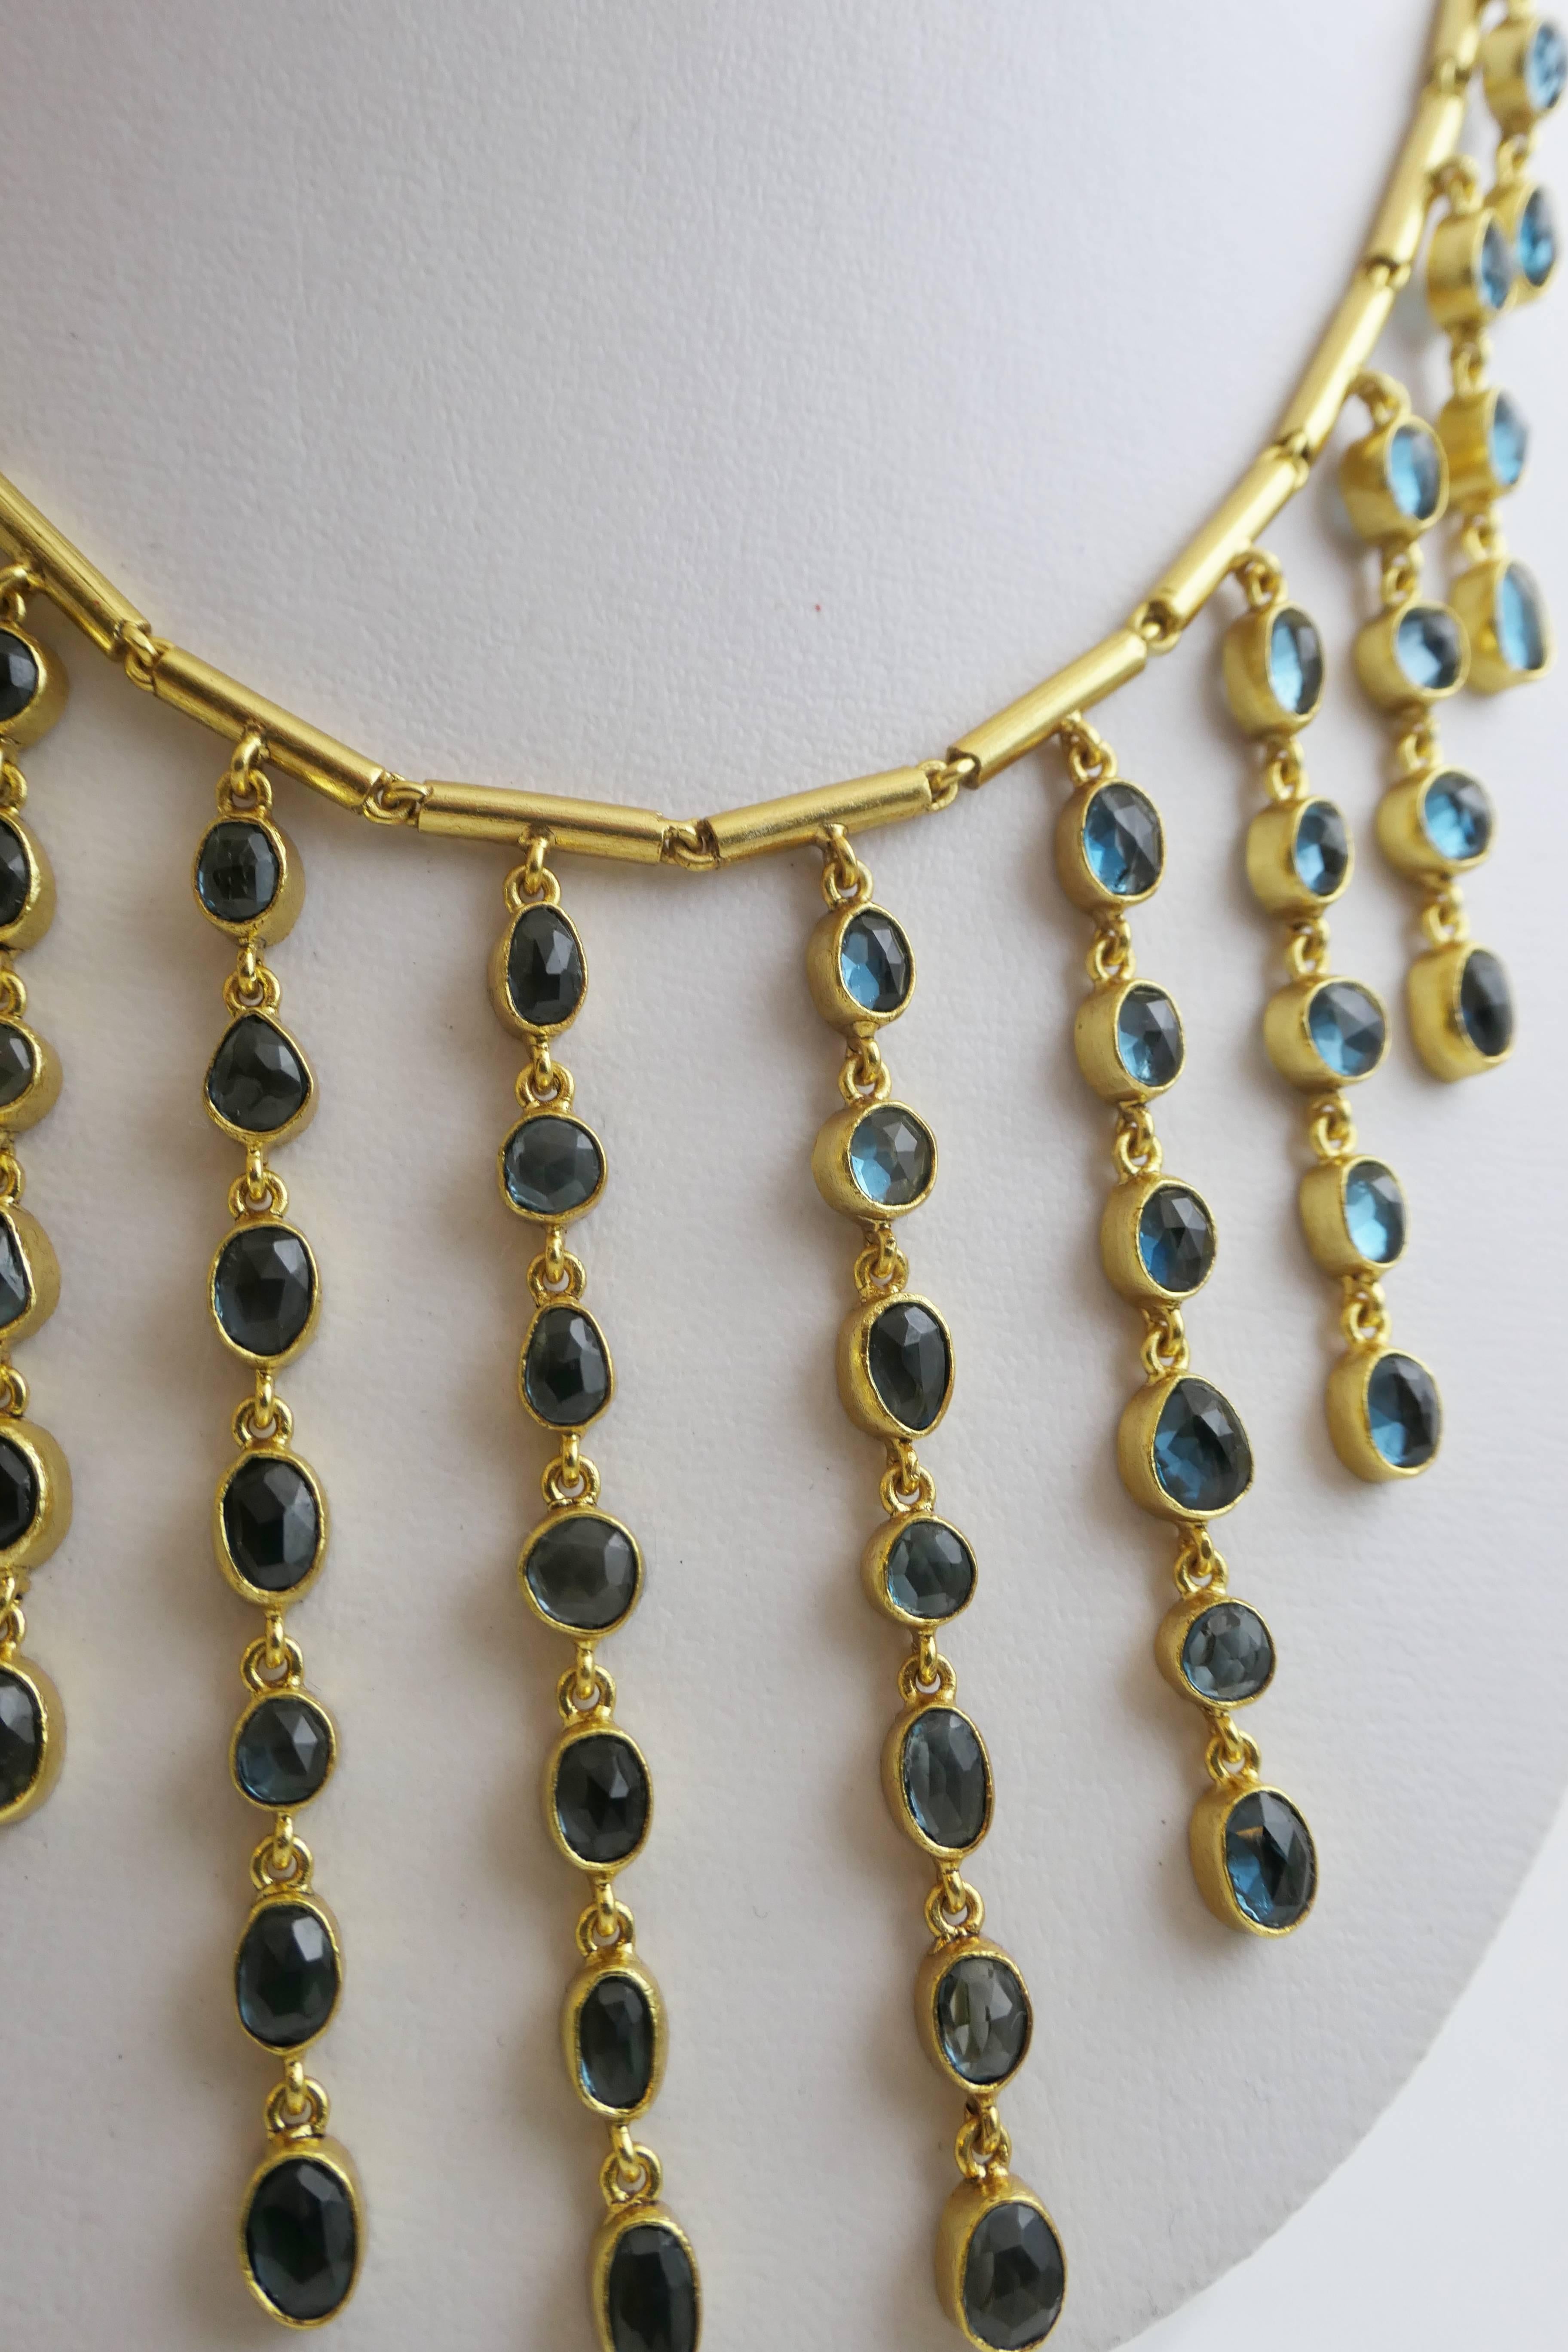 This London blue topaz necklace is 17 inches long with an additional 1.8 inch of extension chain . The faceted london blue topaz are approximately 4x5mm +/- are of varying shapes. The longest part of the necklace is approximately 3.2 inches - the